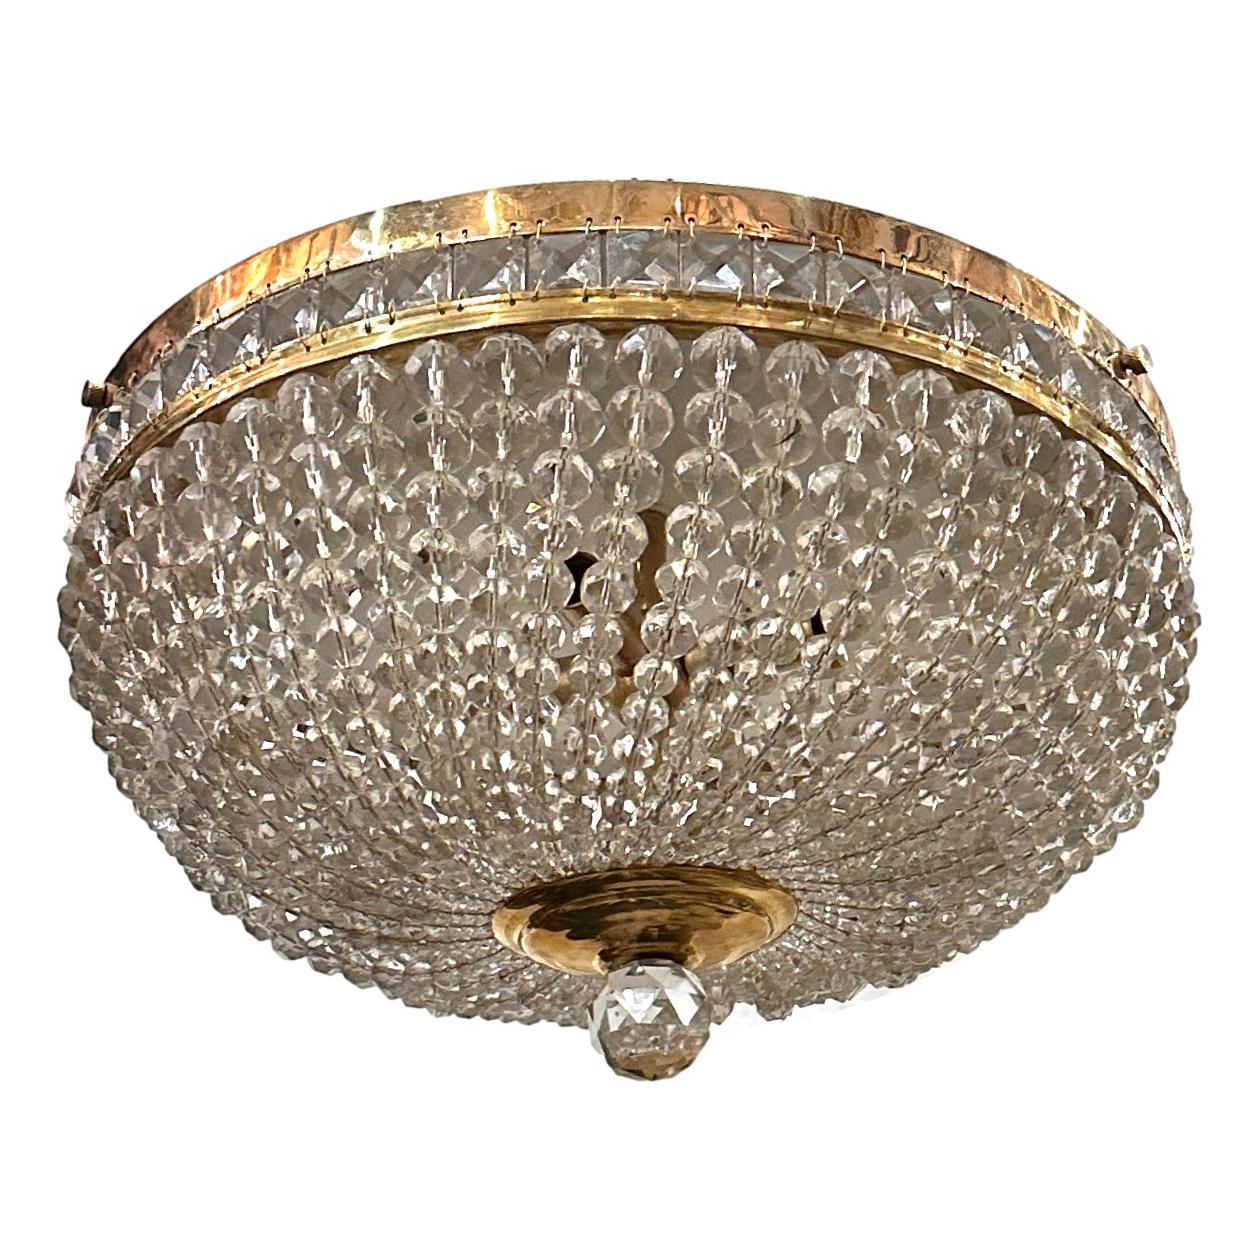 Set of 4 French circa 1950's crystal light fixtures with 4 interior lights.

Measurements:
Drop: 9